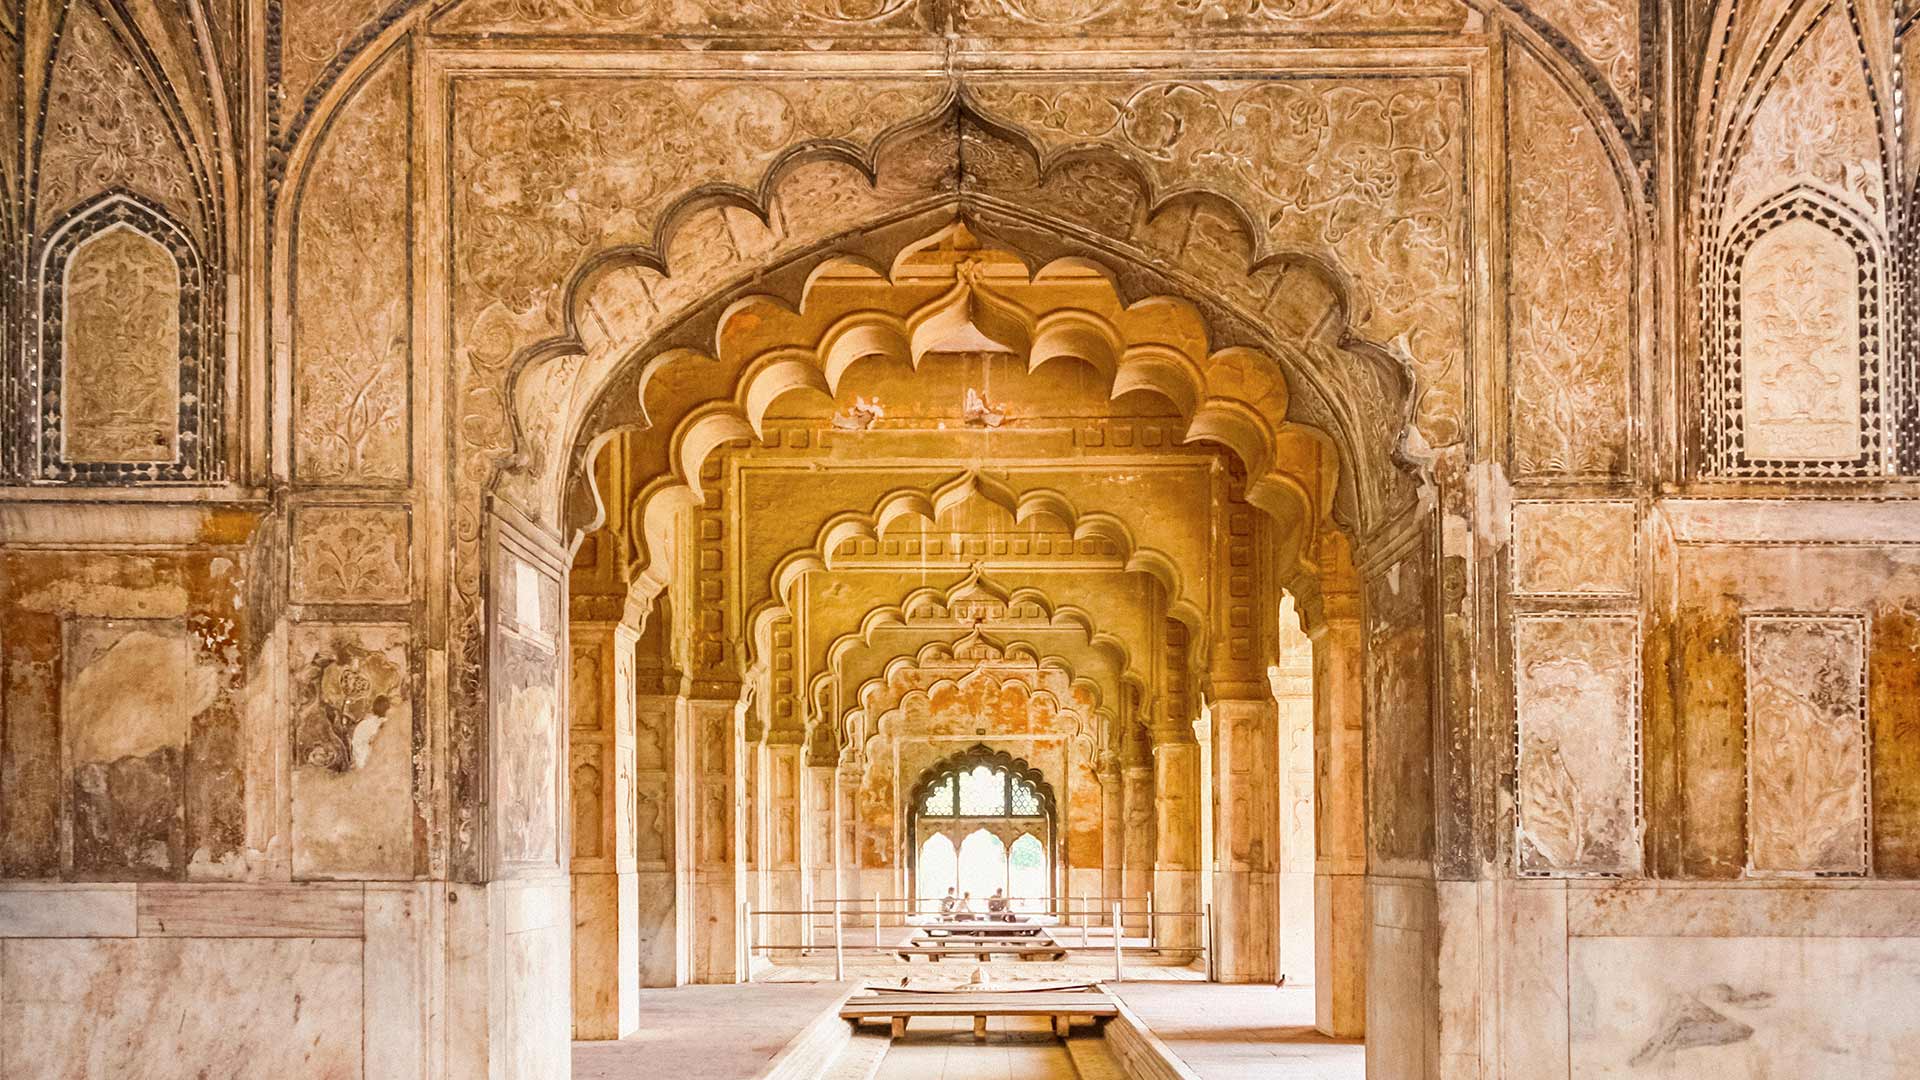 Ornate arcade at the Red Fort of Delhi, India by Andrew Palmer